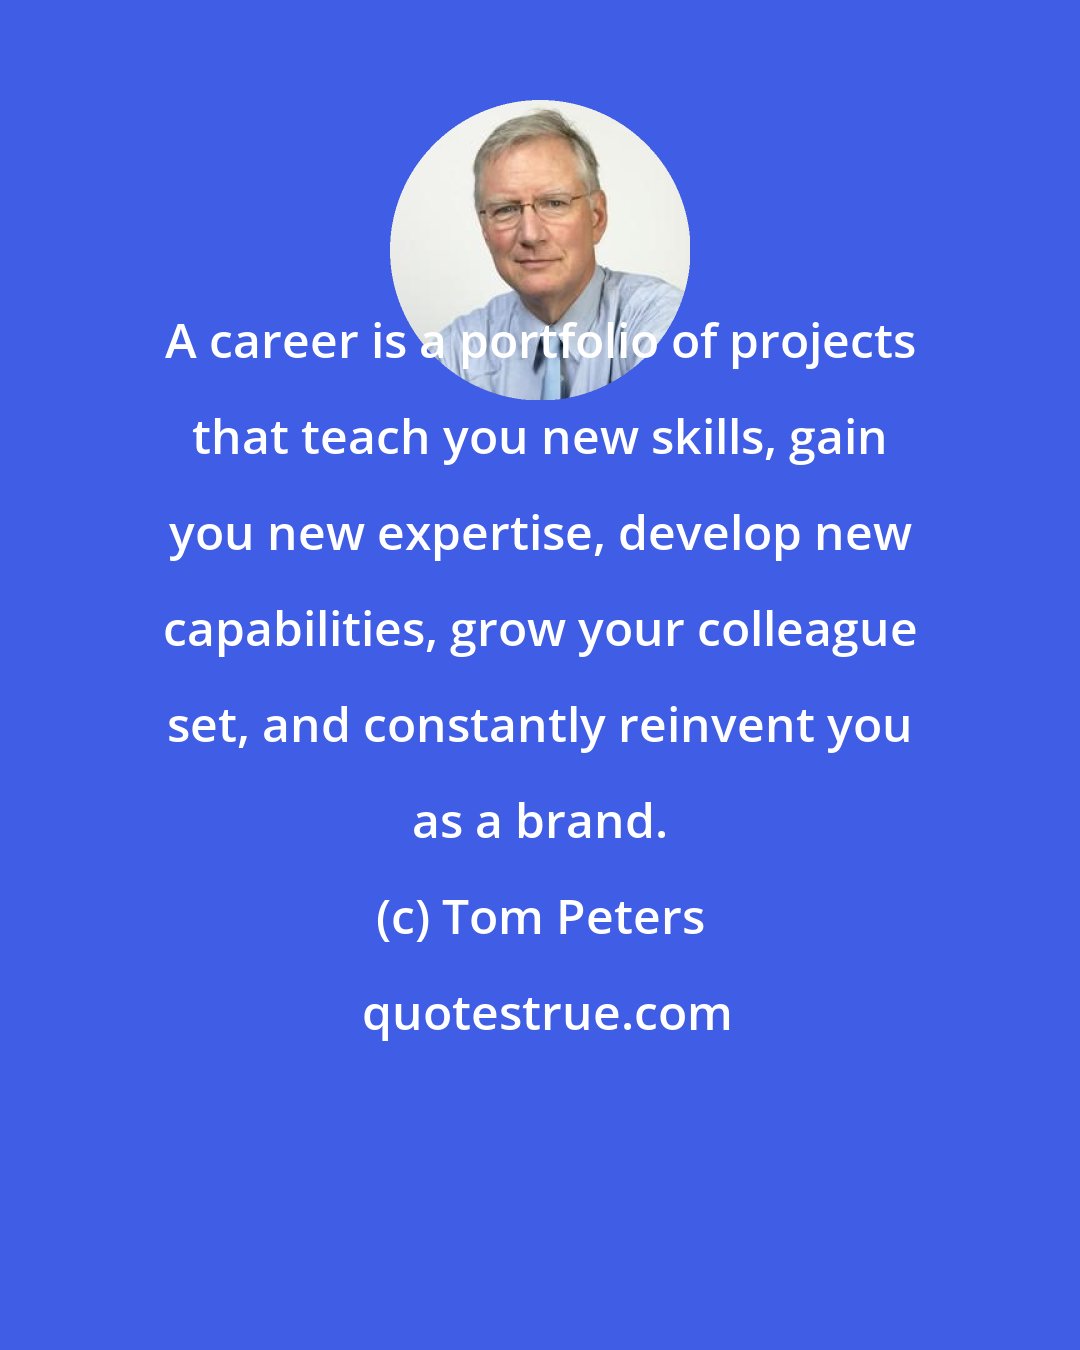 Tom Peters: A career is a portfolio of projects that teach you new skills, gain you new expertise, develop new capabilities, grow your colleague set, and constantly reinvent you as a brand.